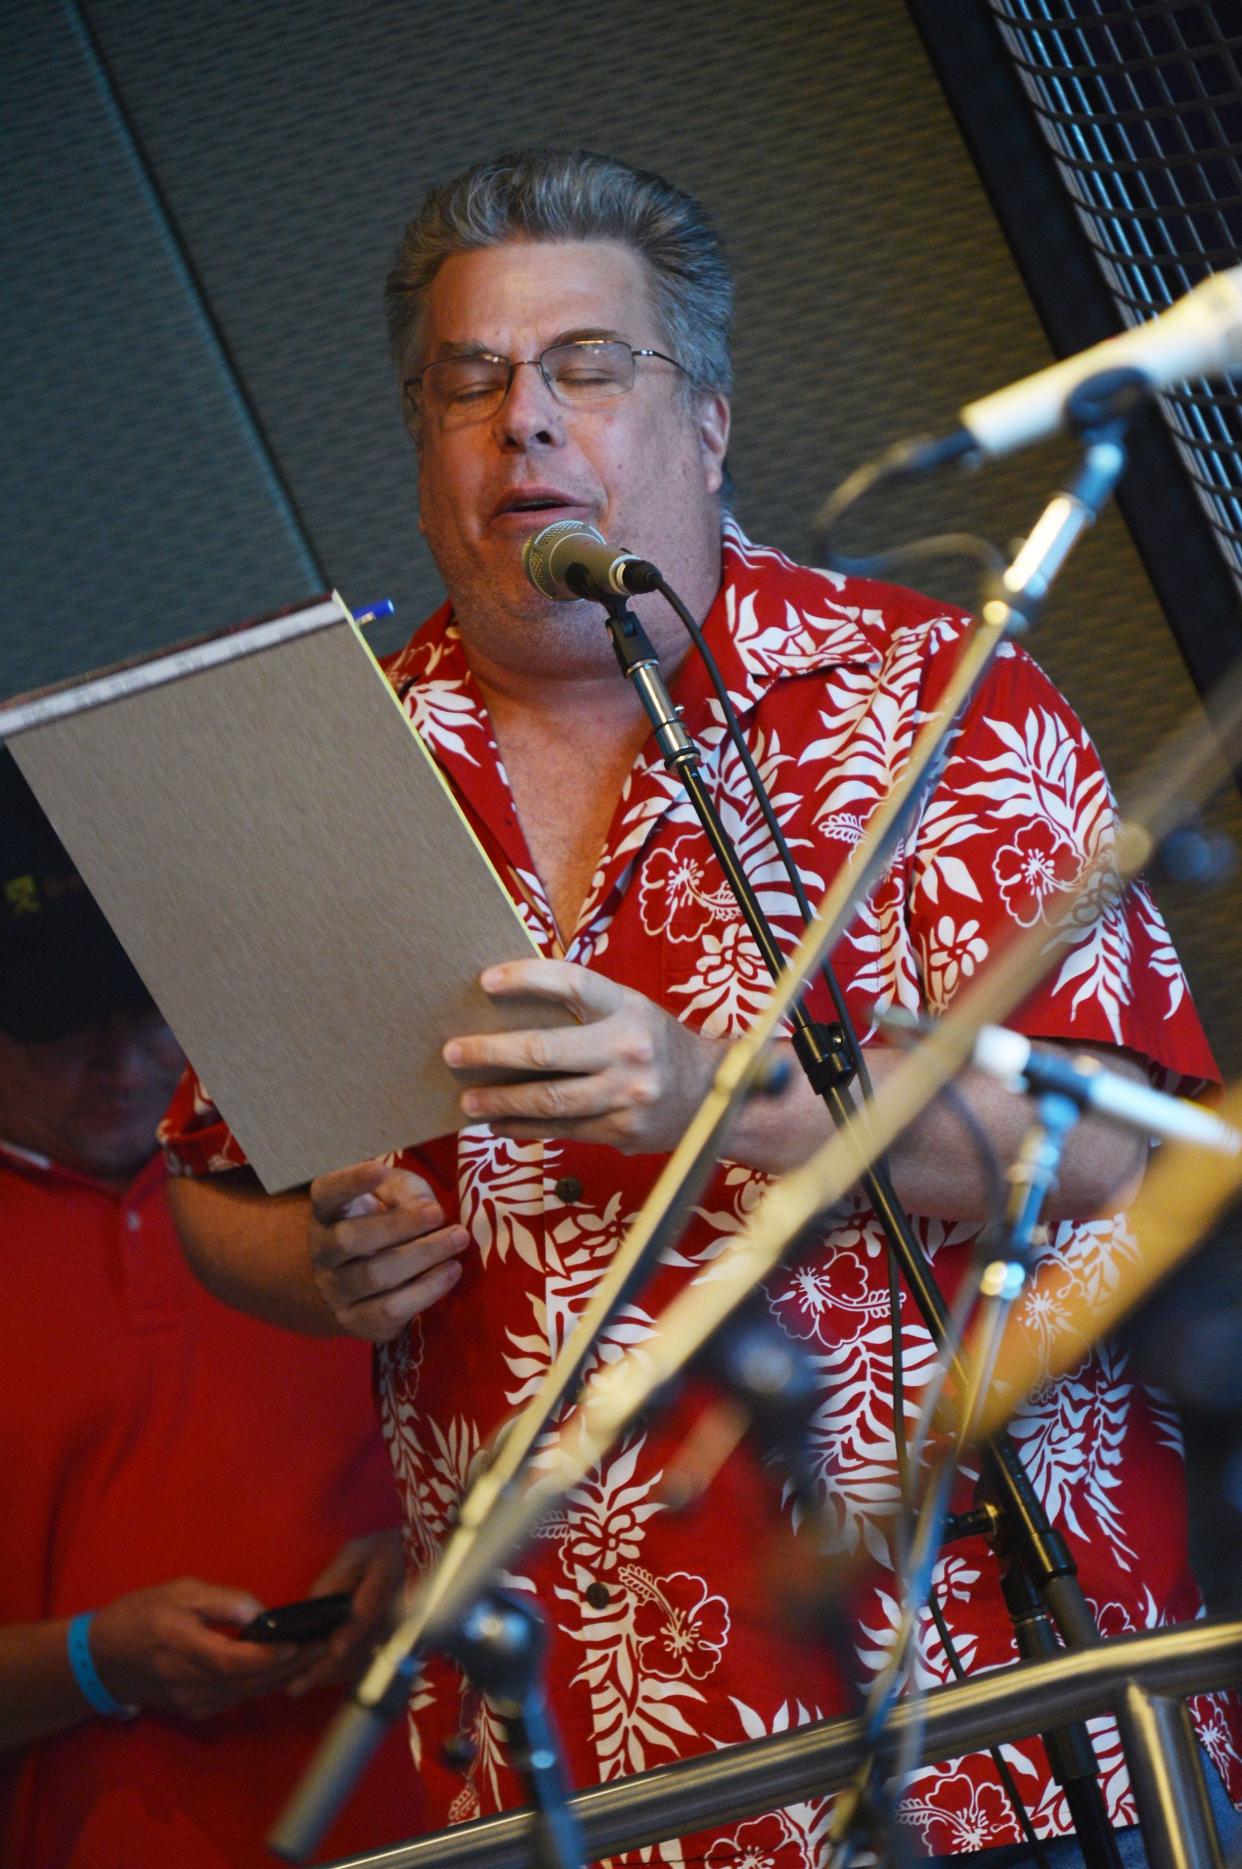 Mojo Nixon, the musician and radio host known for the satirical song "Elvis is Everywhere" that was a hit on MTV, has died at 66.